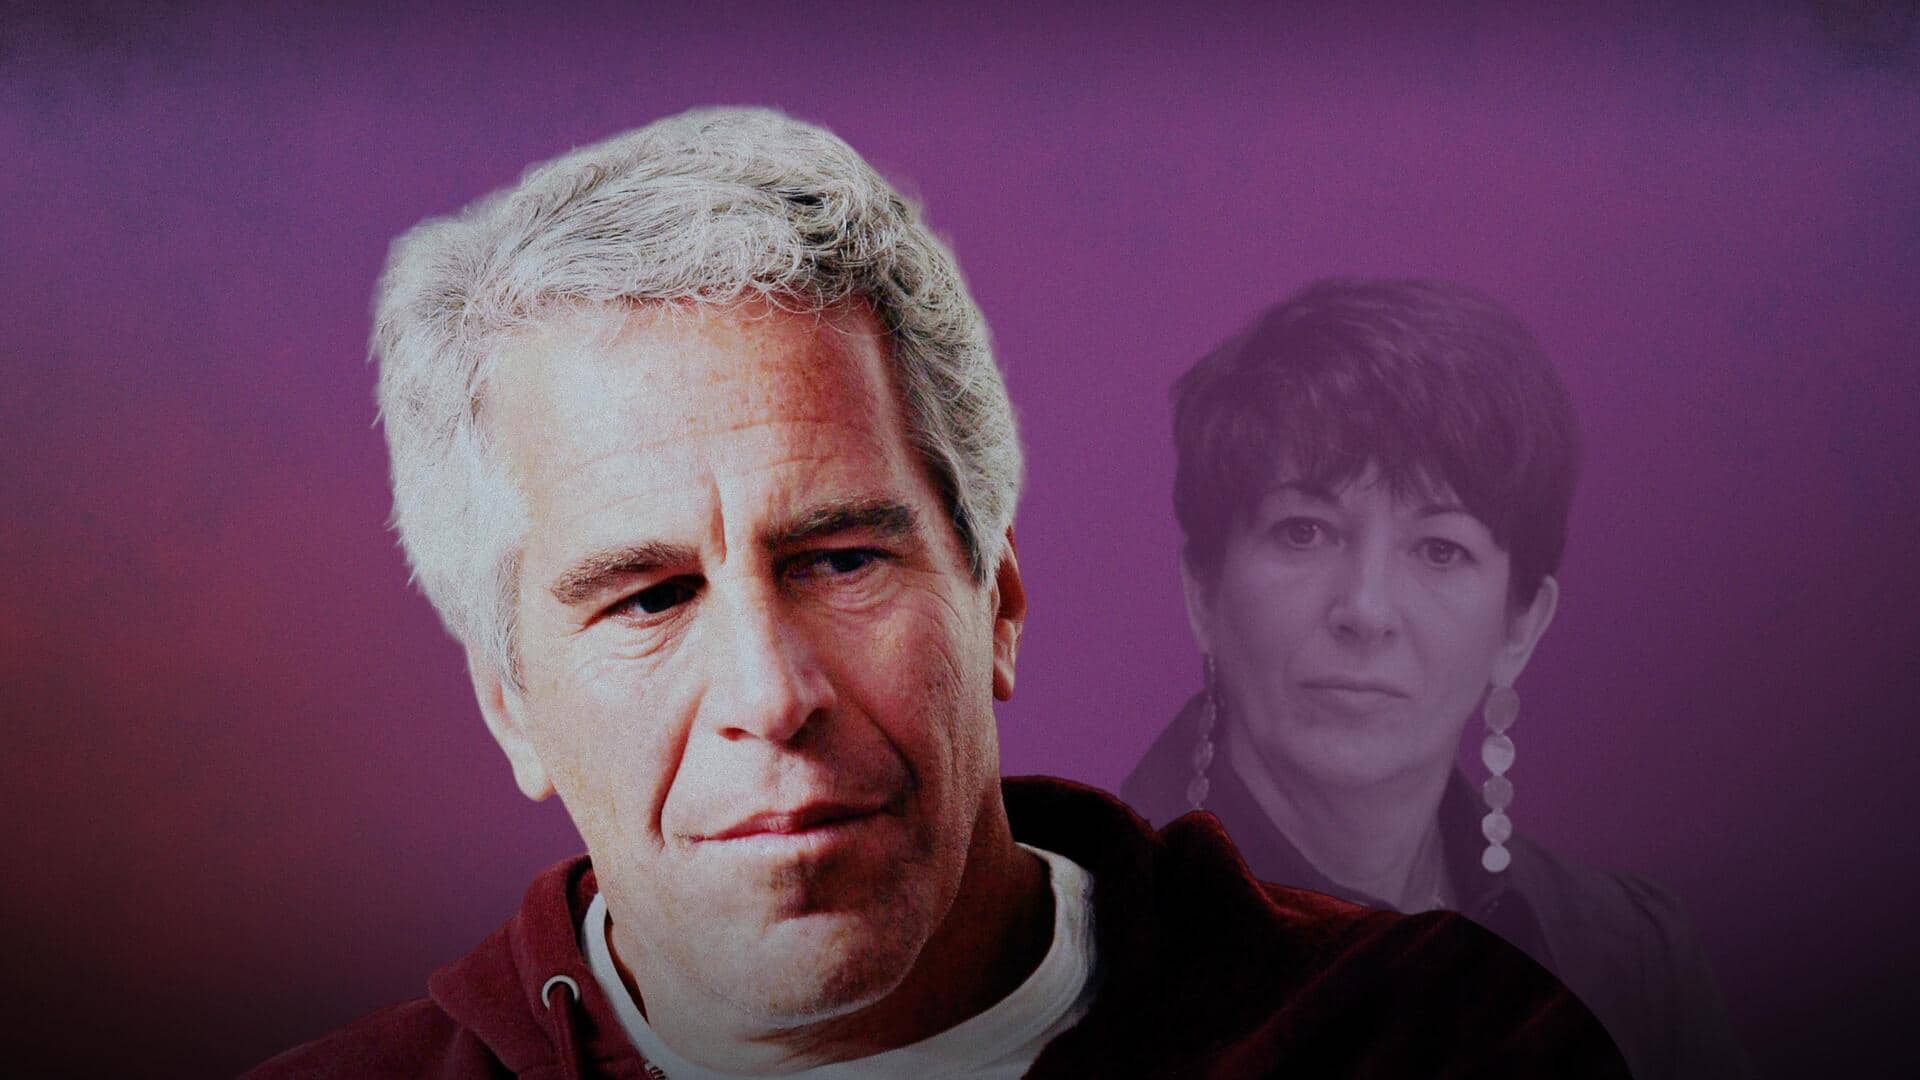 How did sex offender Epstein make his $560 million fortune?